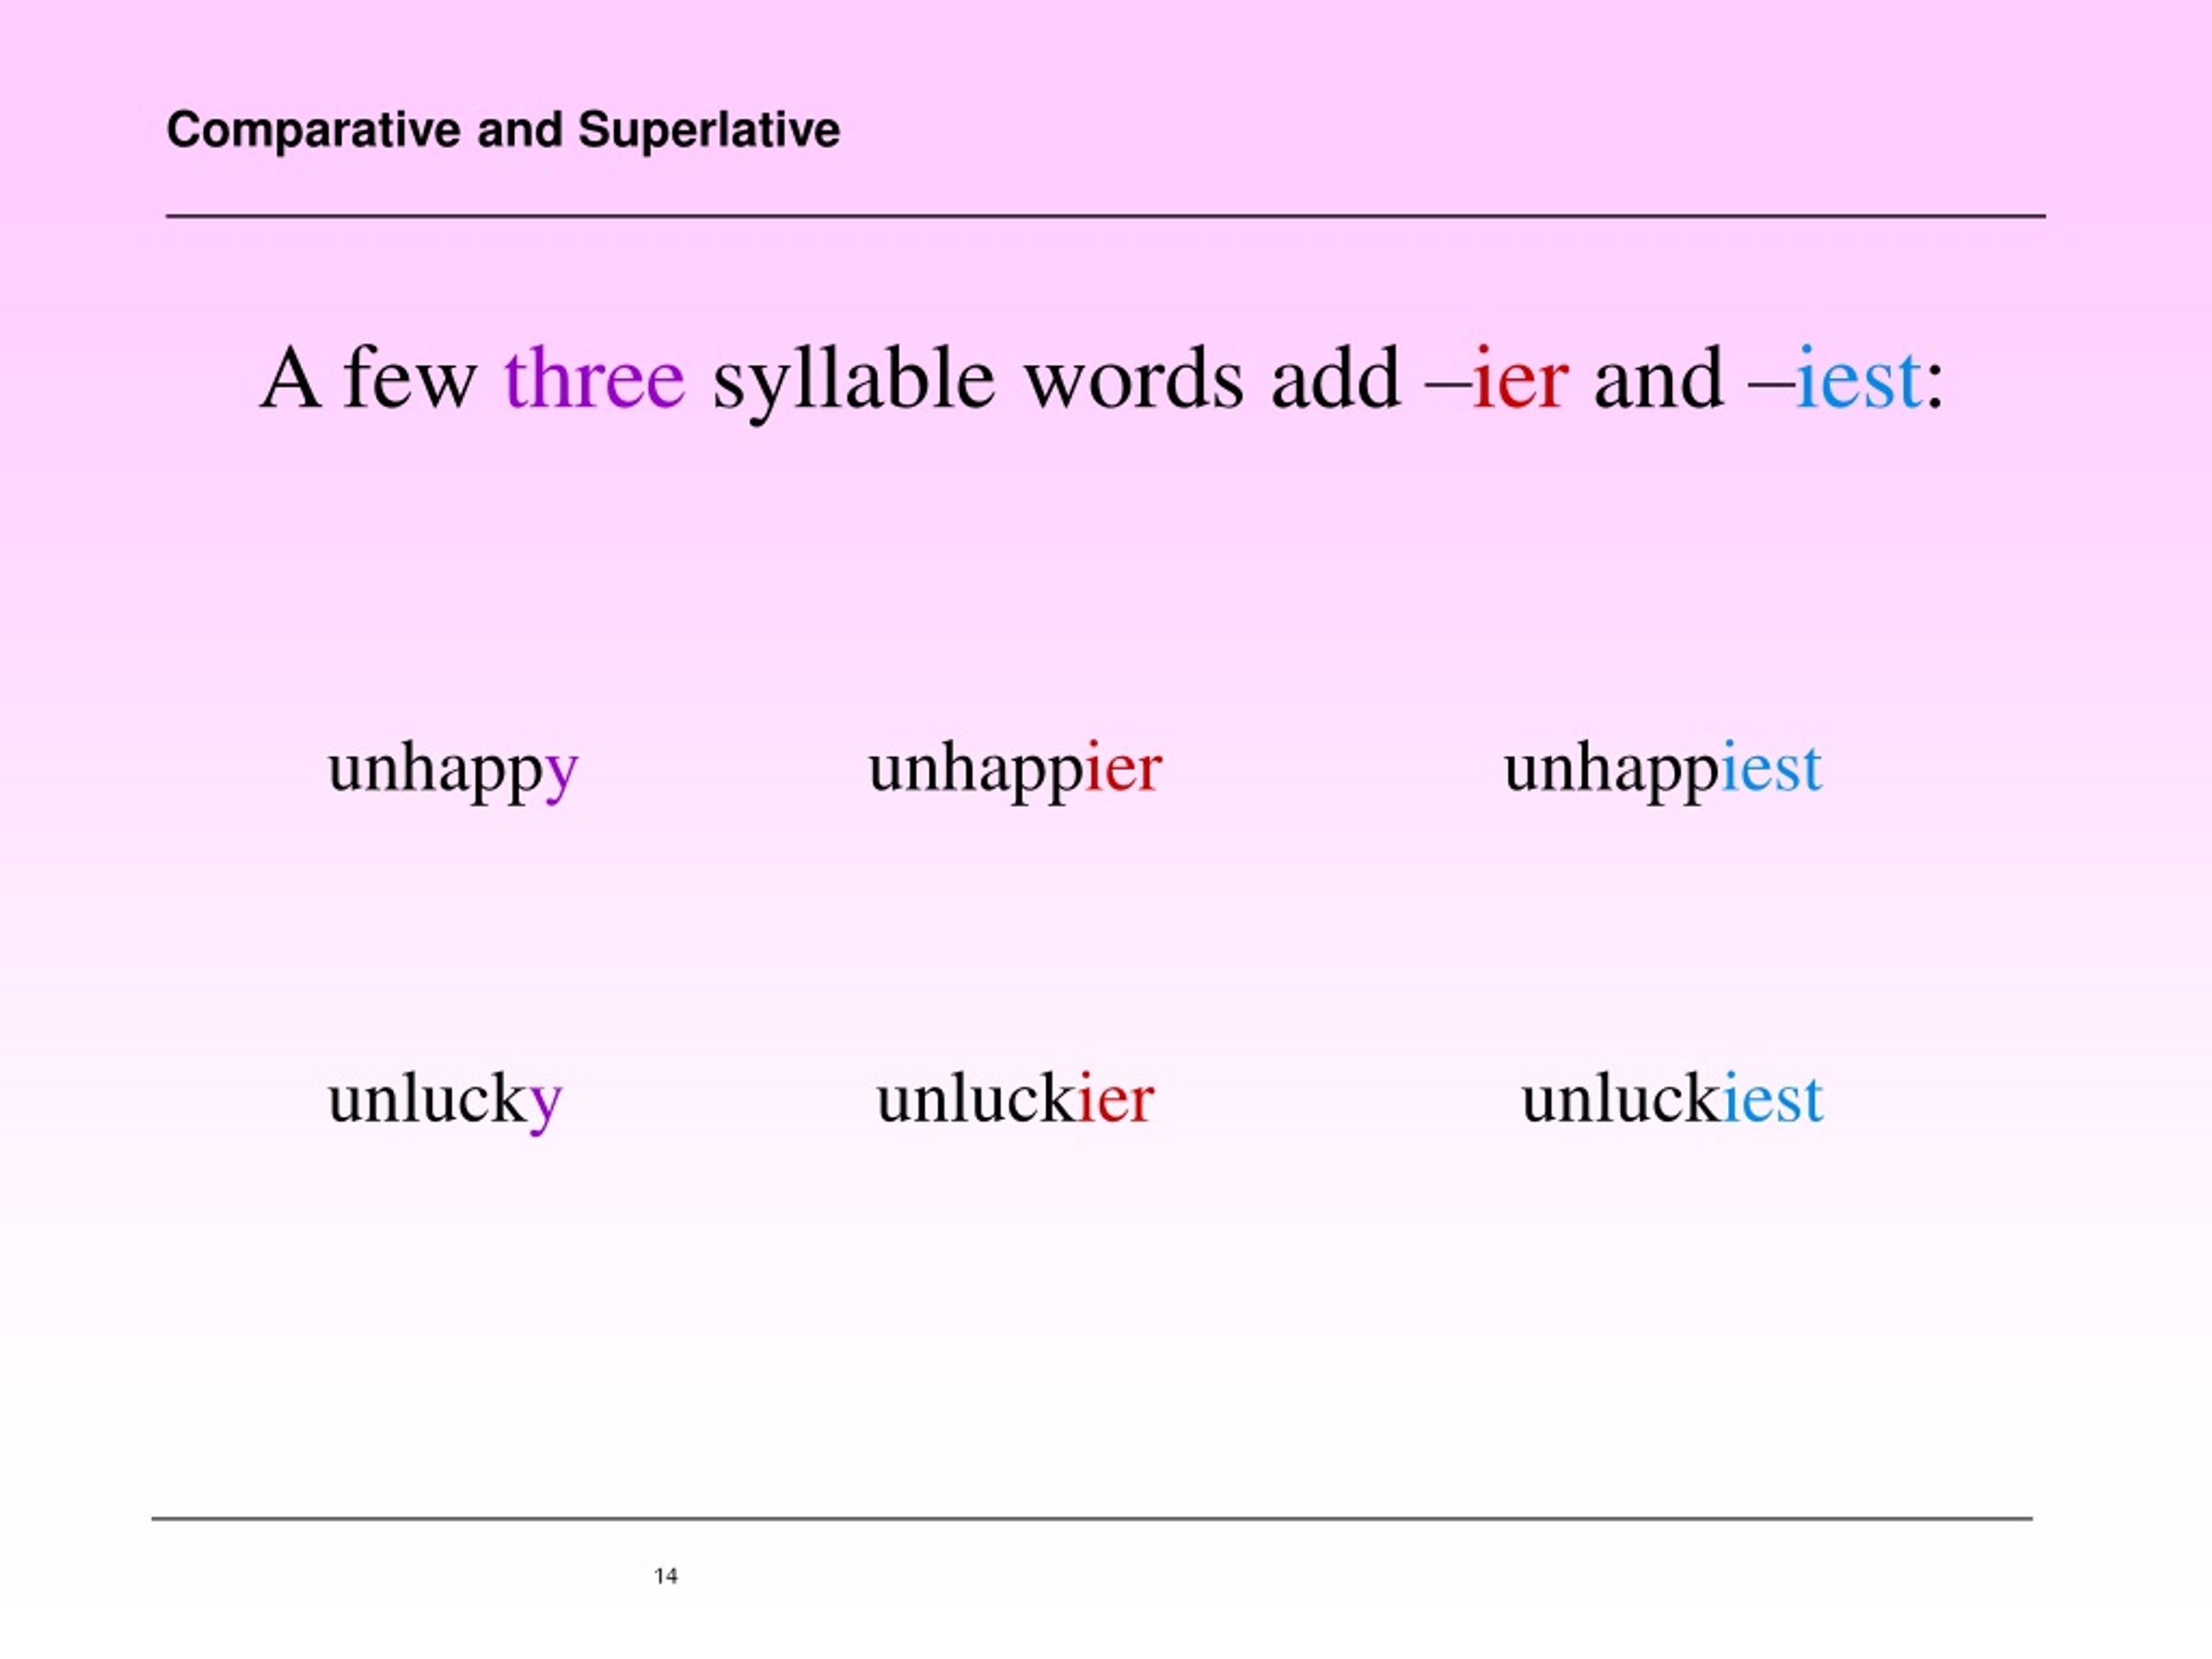 Young comparative and superlative. Comparatives and Superlatives. Предложения Comparative and Superlative. Few Comparative and Superlative. Comparative and Superlatives упражнения 3 syllables.